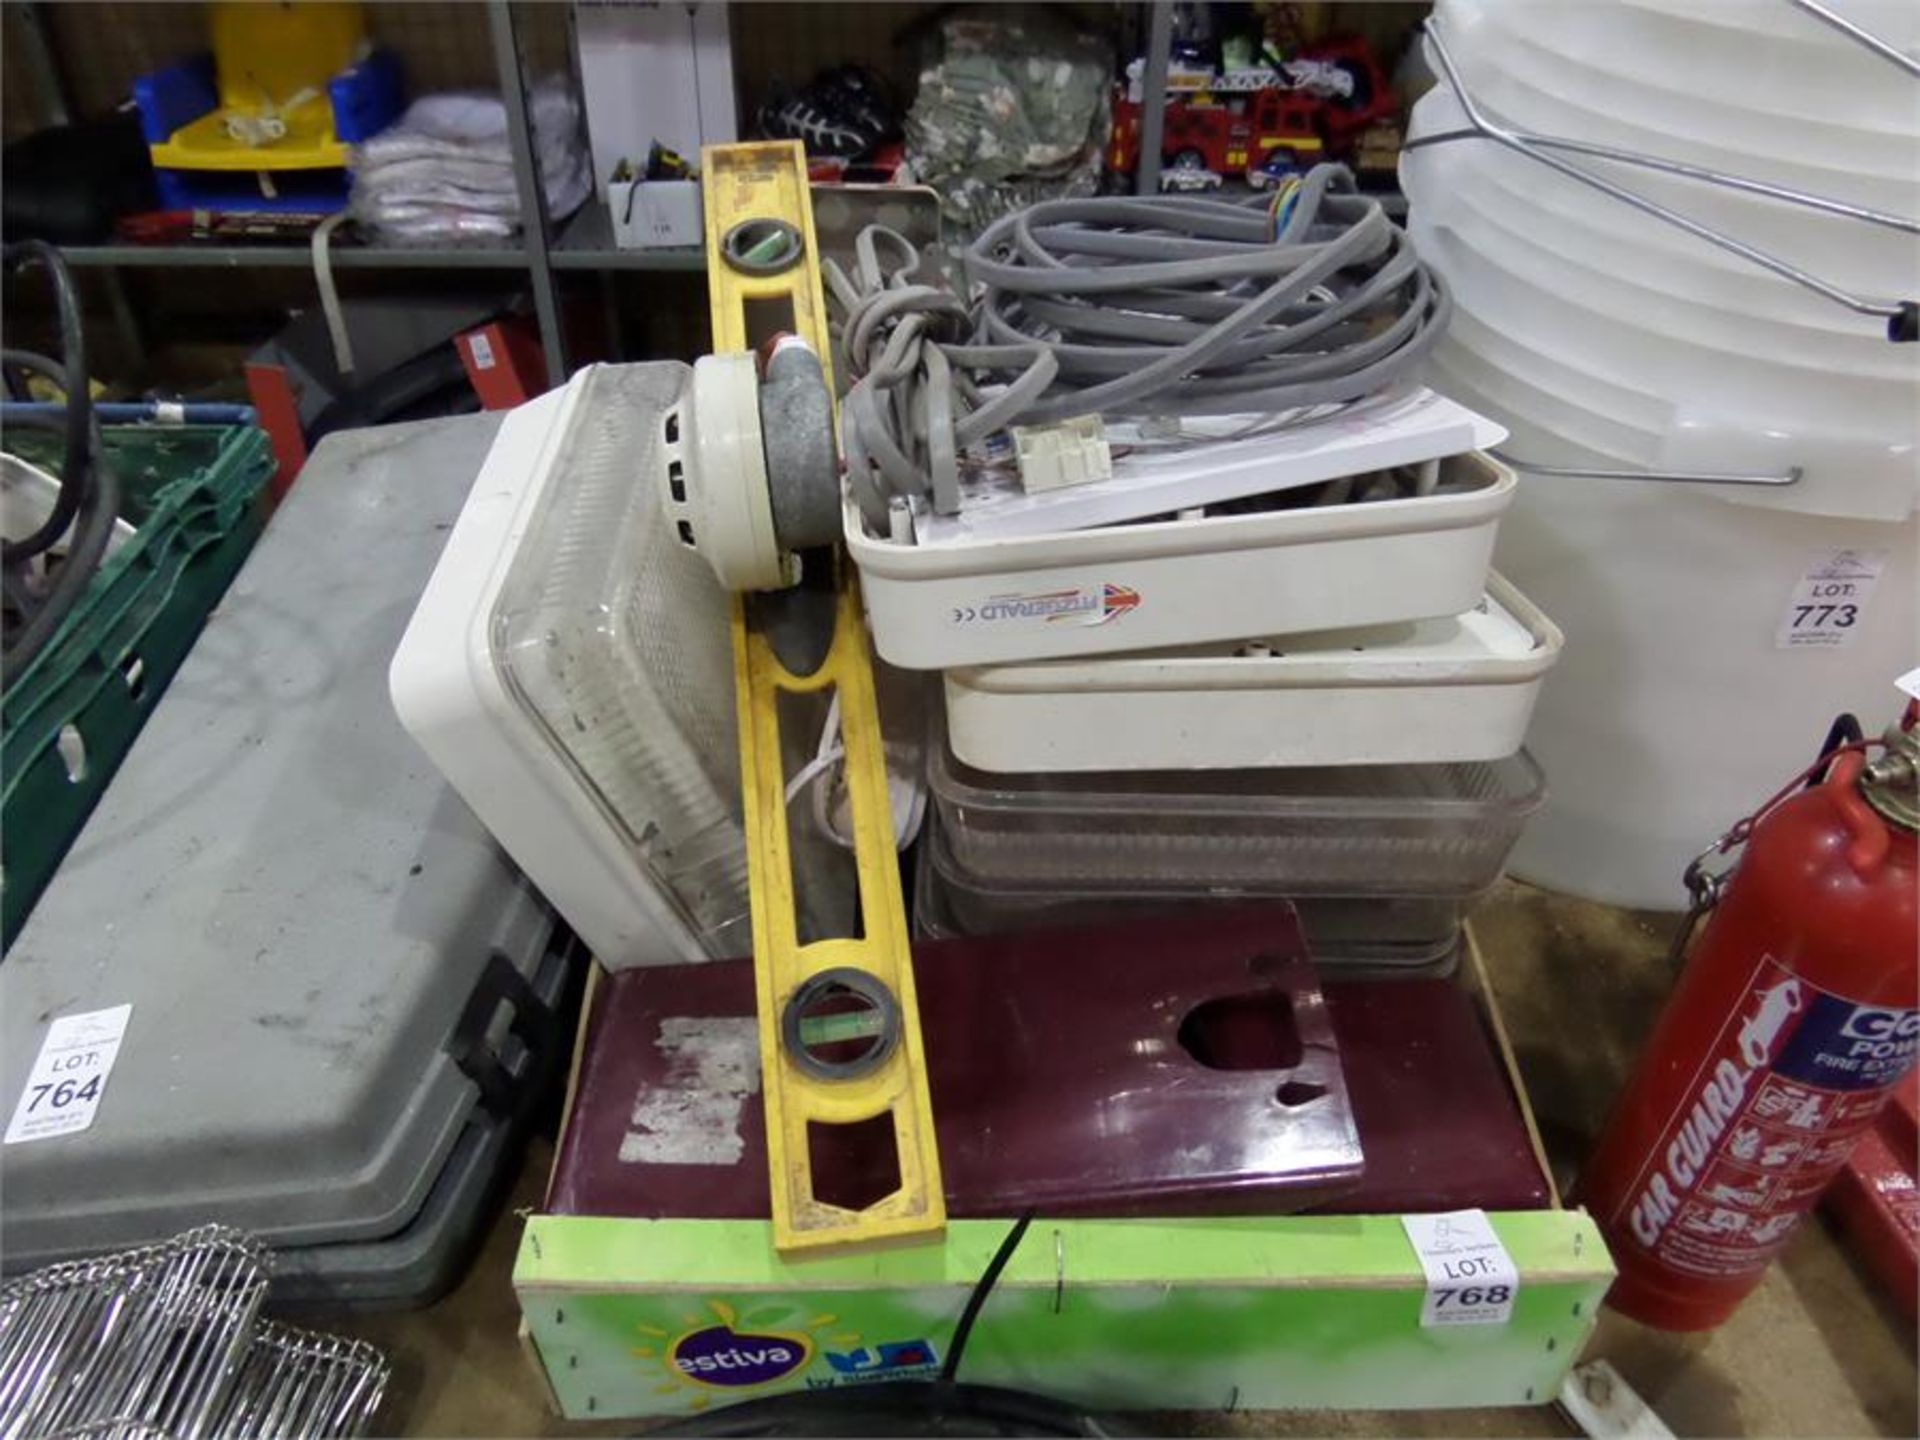 BOX OF ELECTRICAL ITEMS